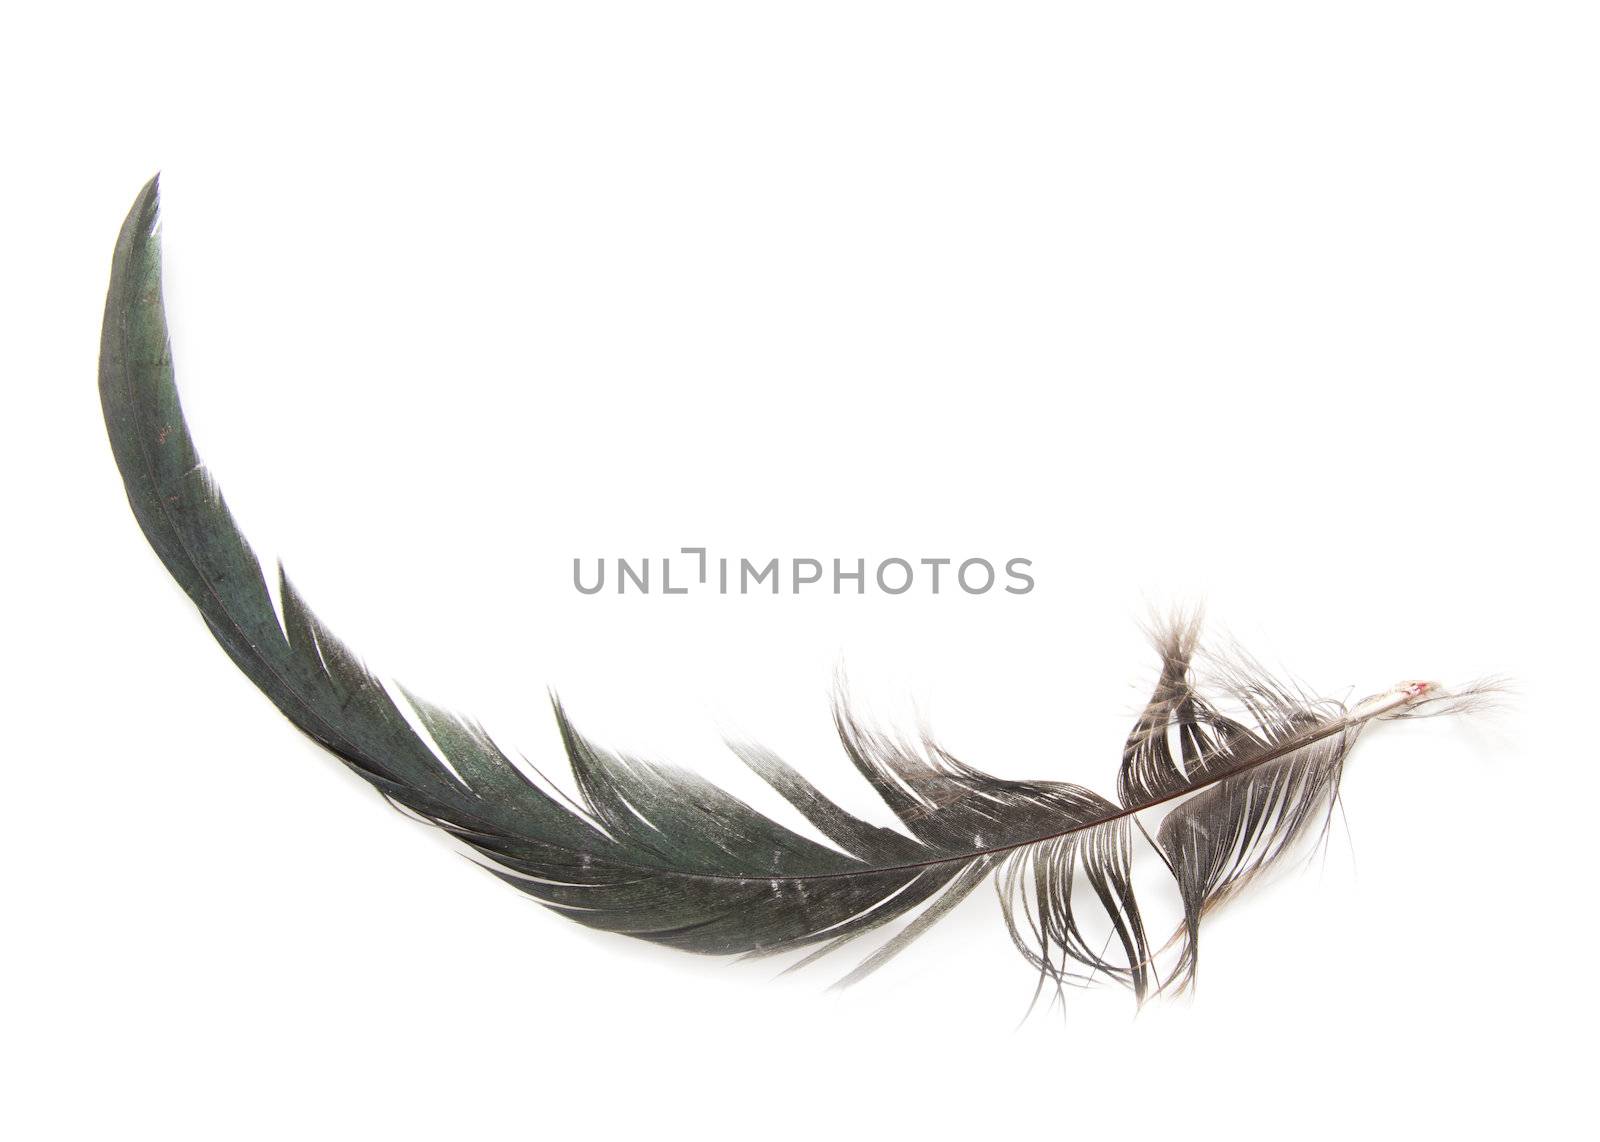 Feather of a bird on a white background